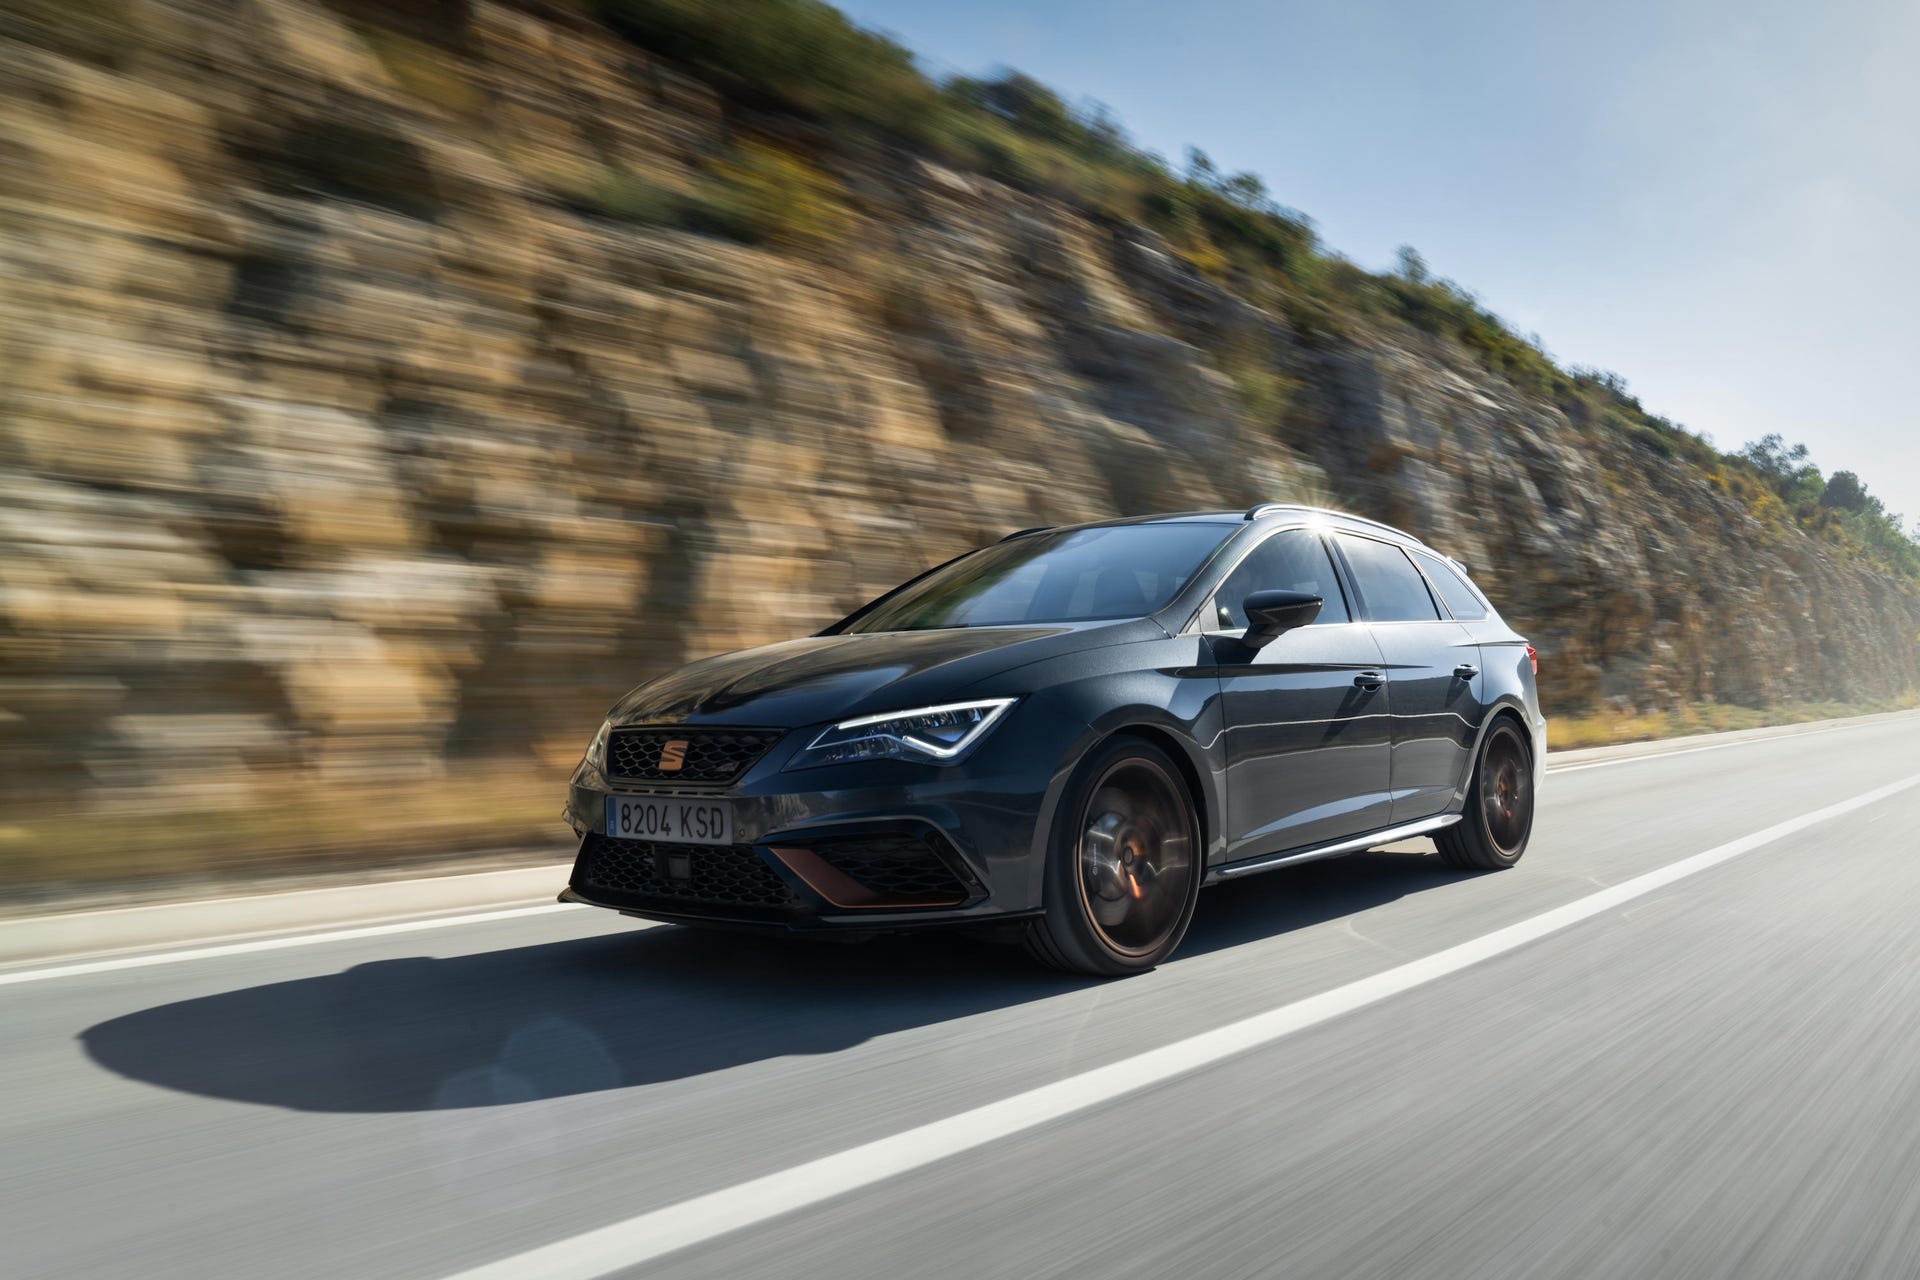 leon-cupra-r-st-brings-new-levels-of-uniqueness-sophistication-and-performance-05-hq